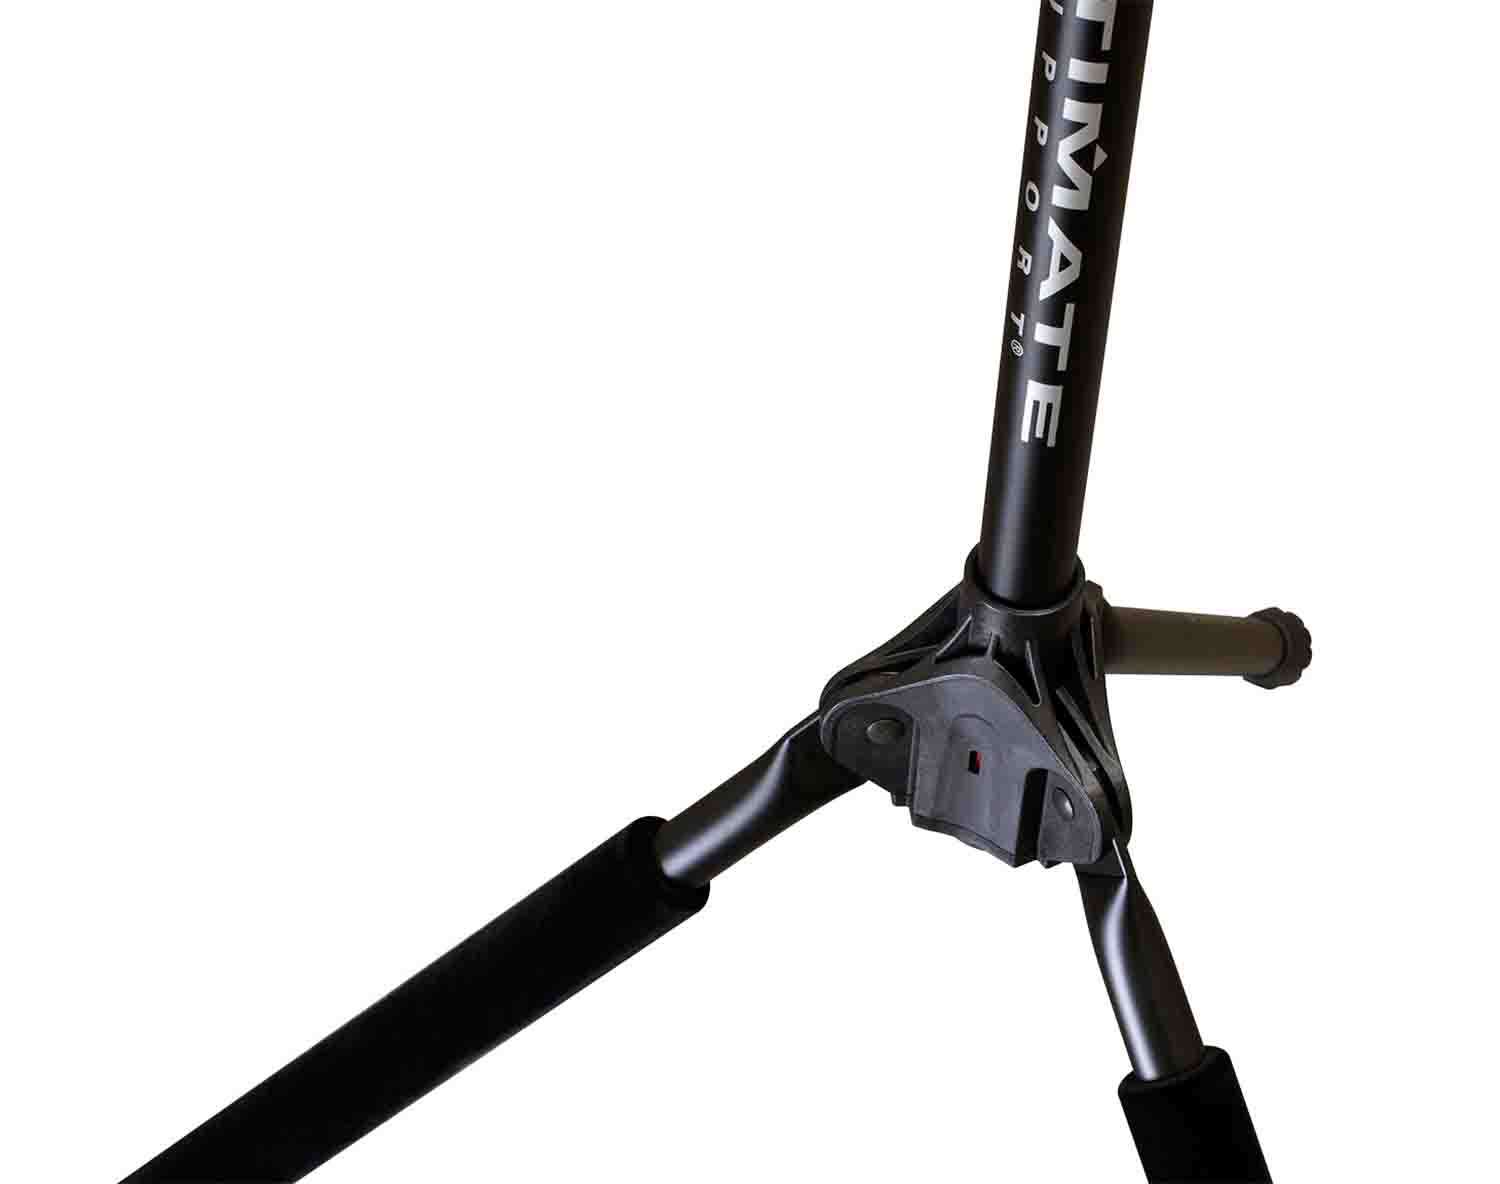 Ultimate Support GS-100+ Genesis Series Guitar Stand with Locking Legs and Security Strap Yoke by Ultimate Support